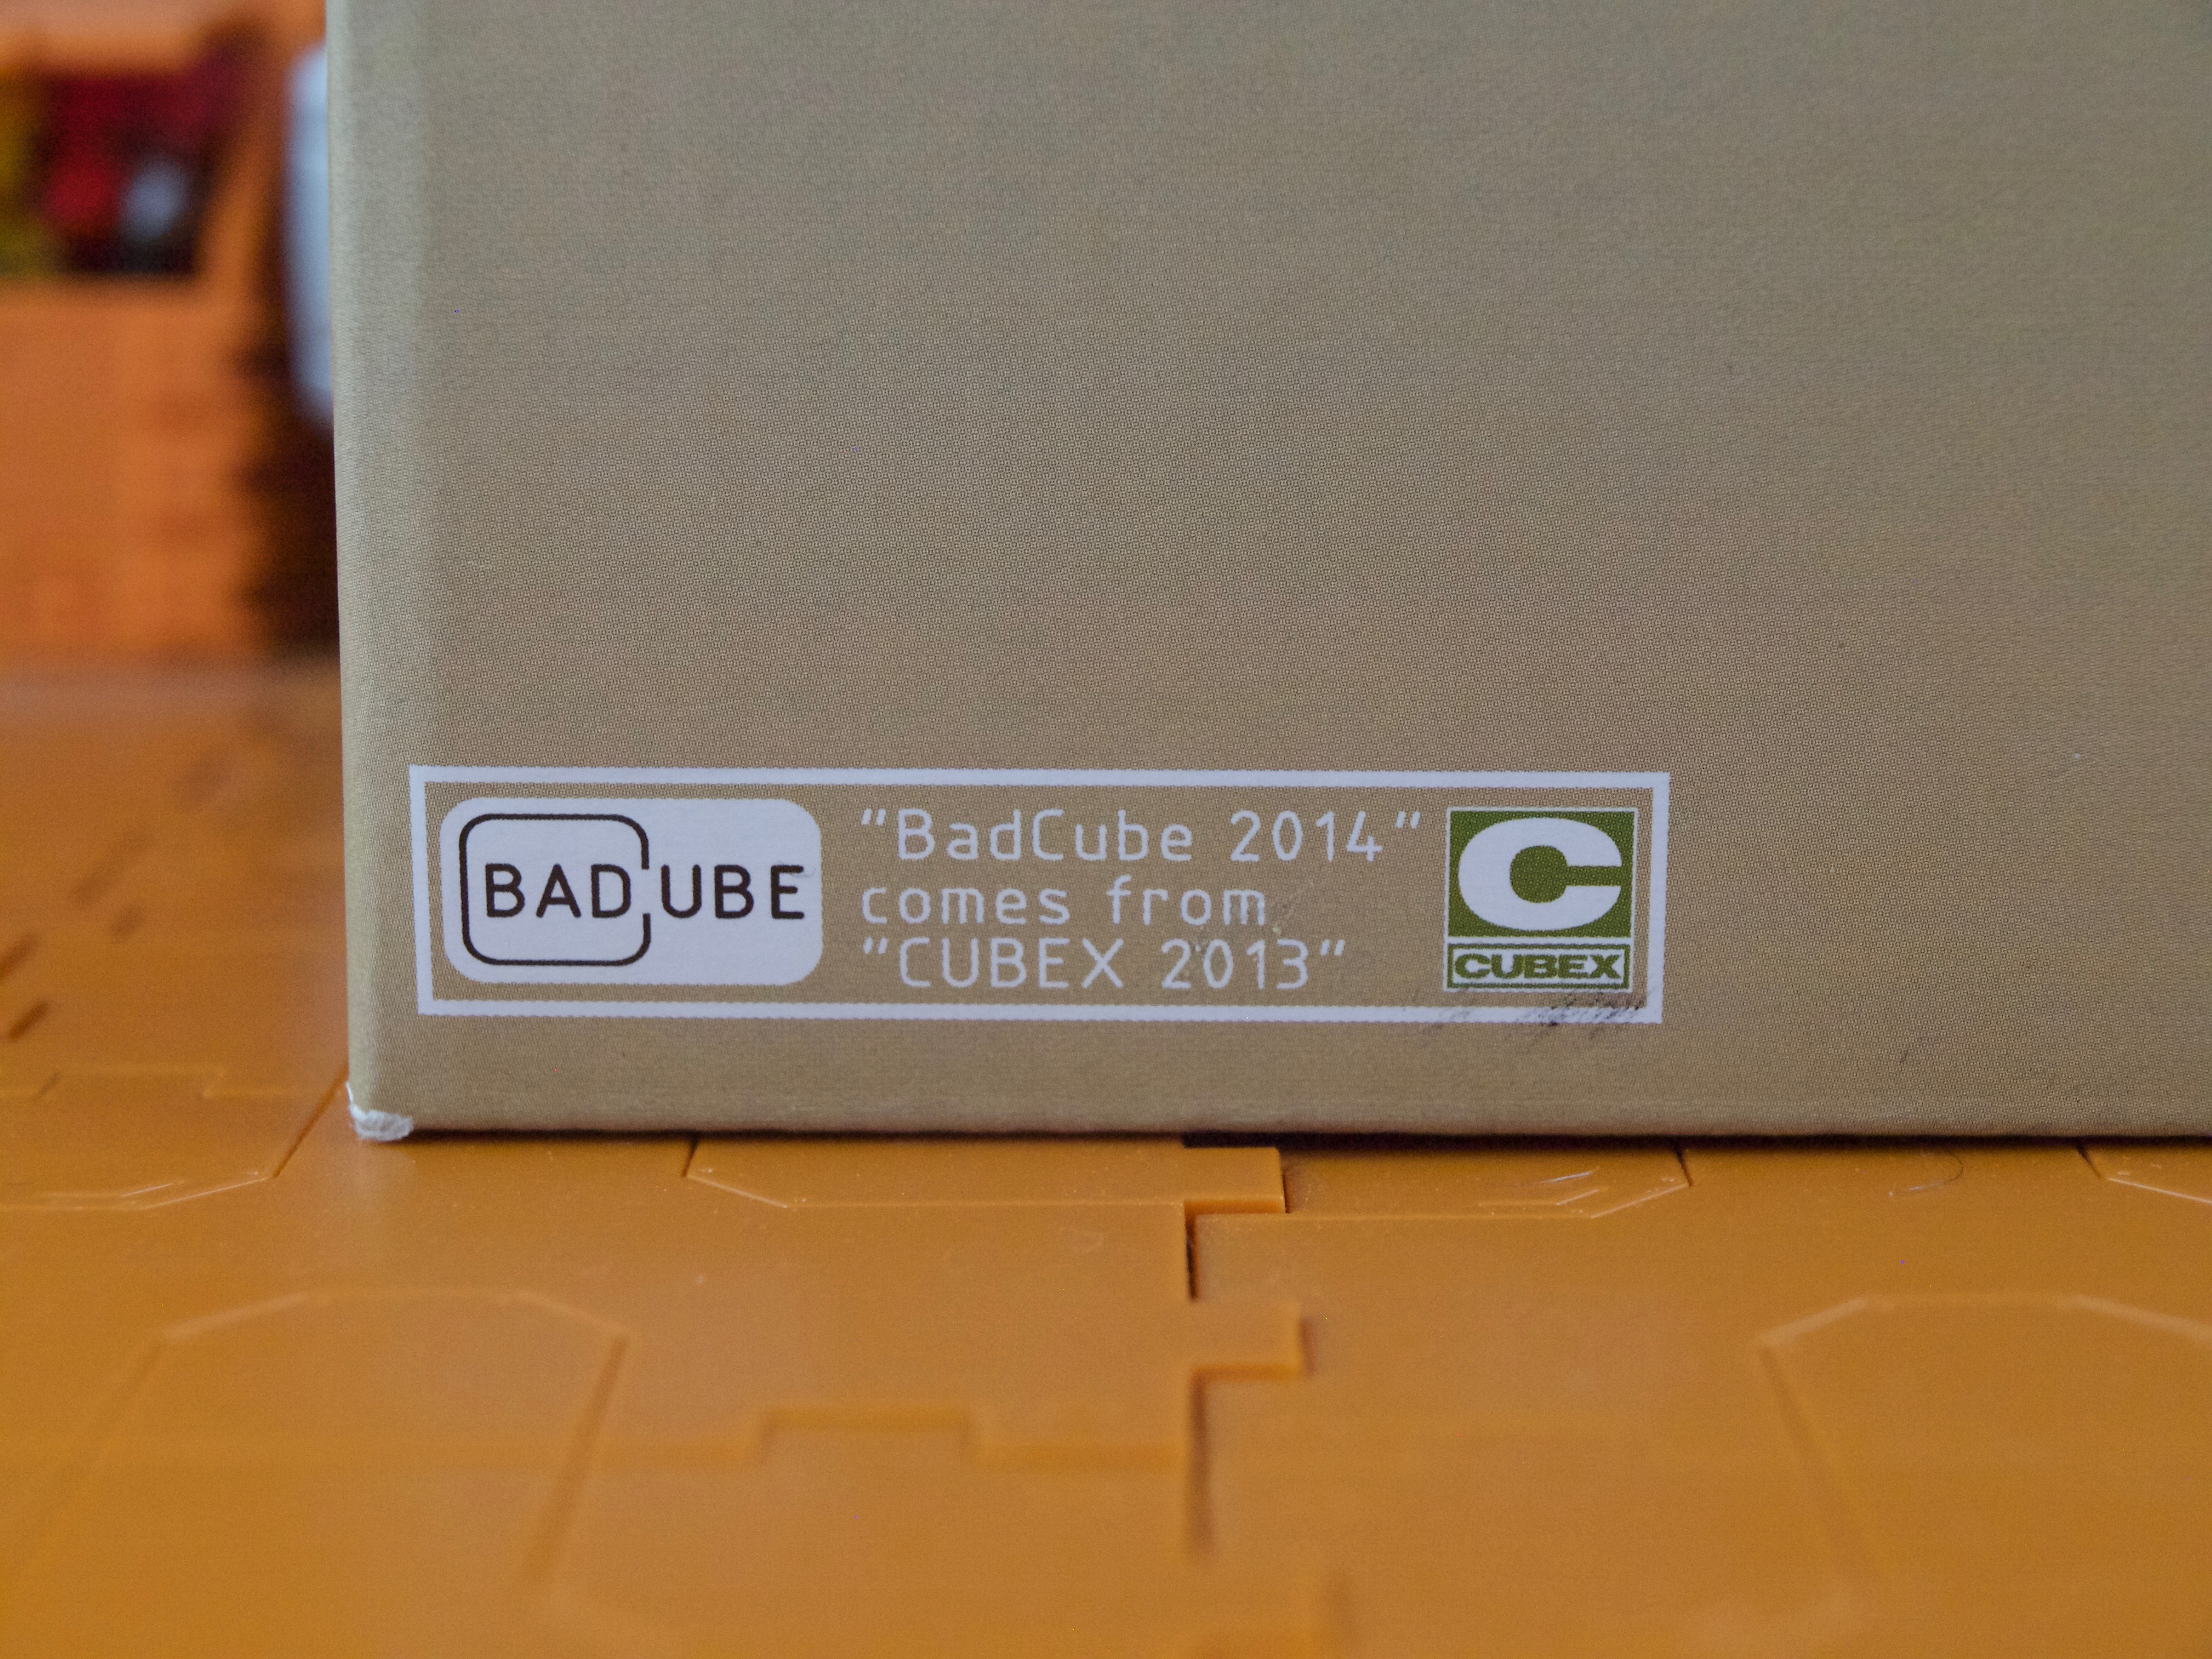 "BadCube 2014" comes from "CUBEX 2013"